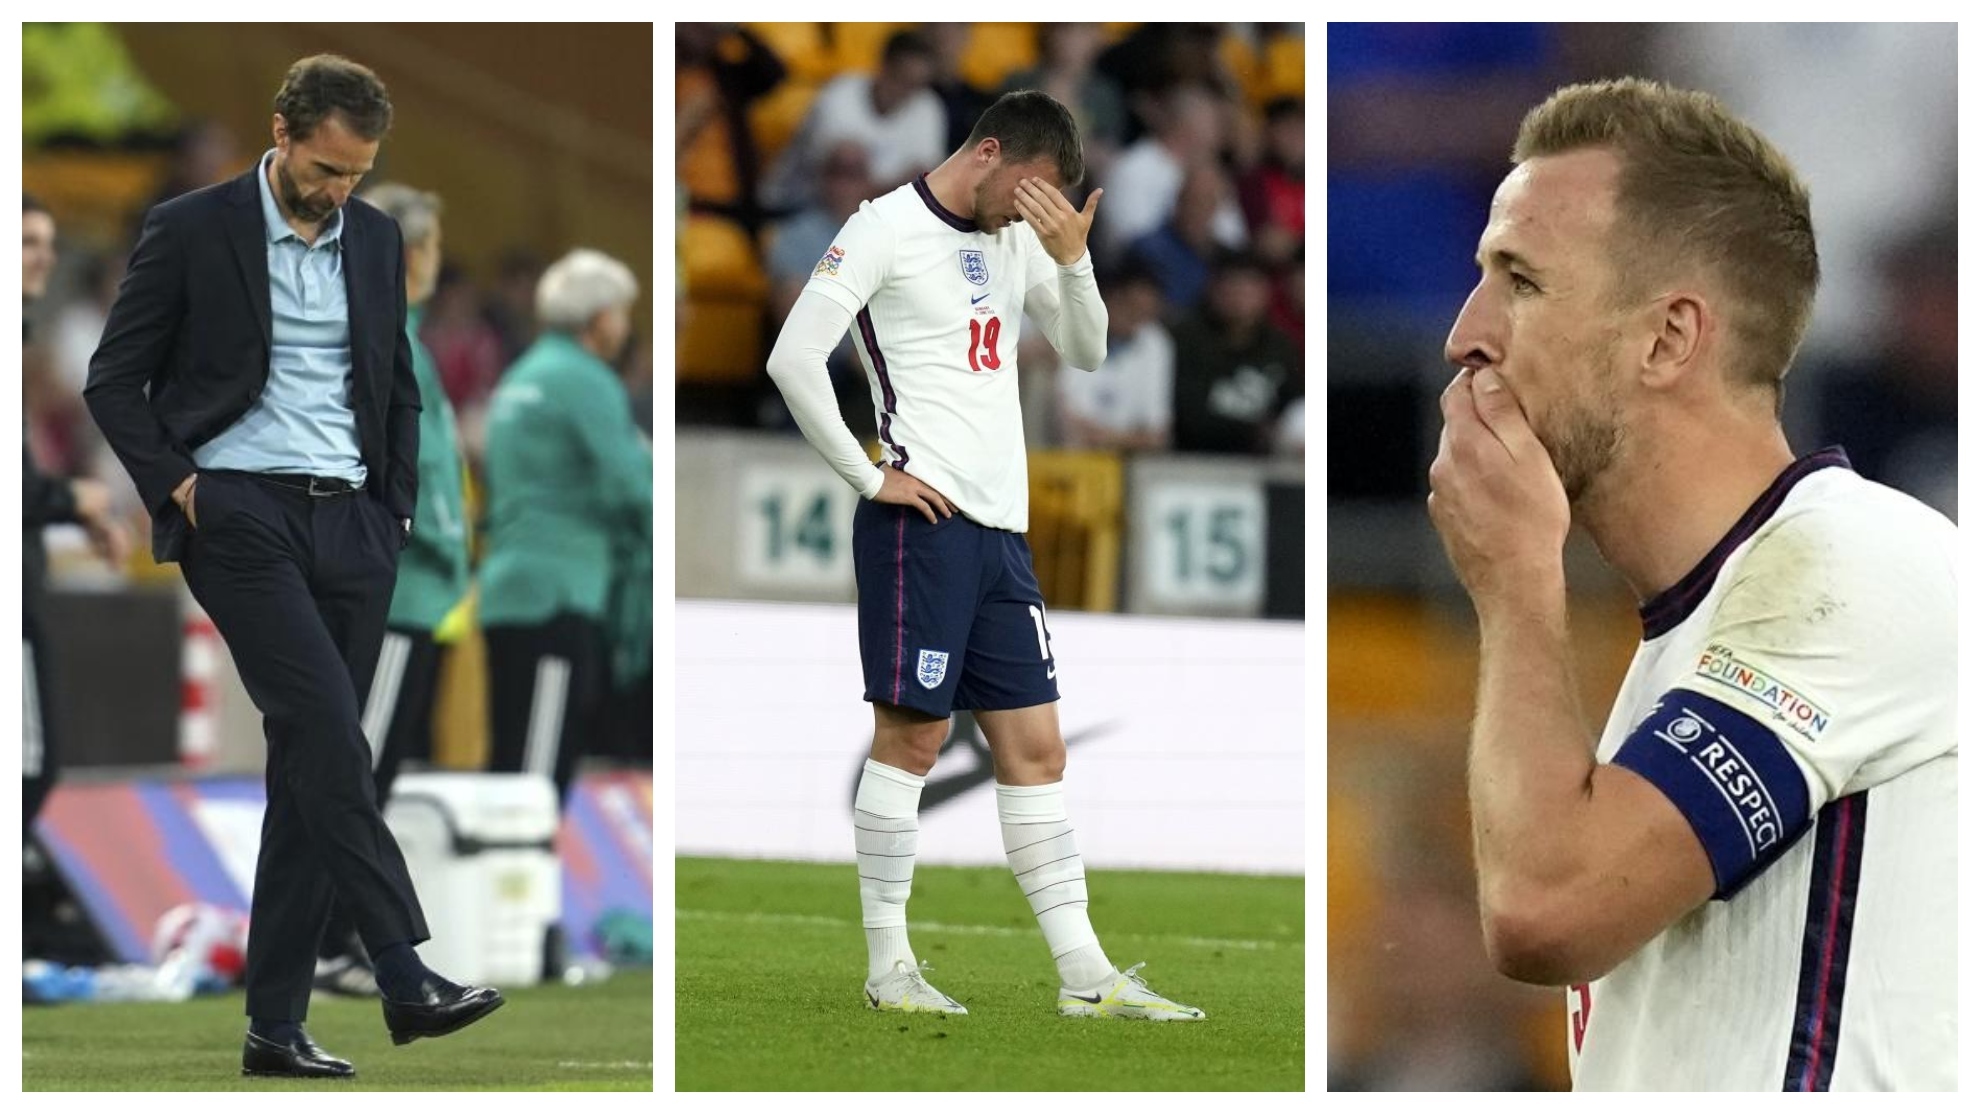 England suffered a humiliation against Hungary